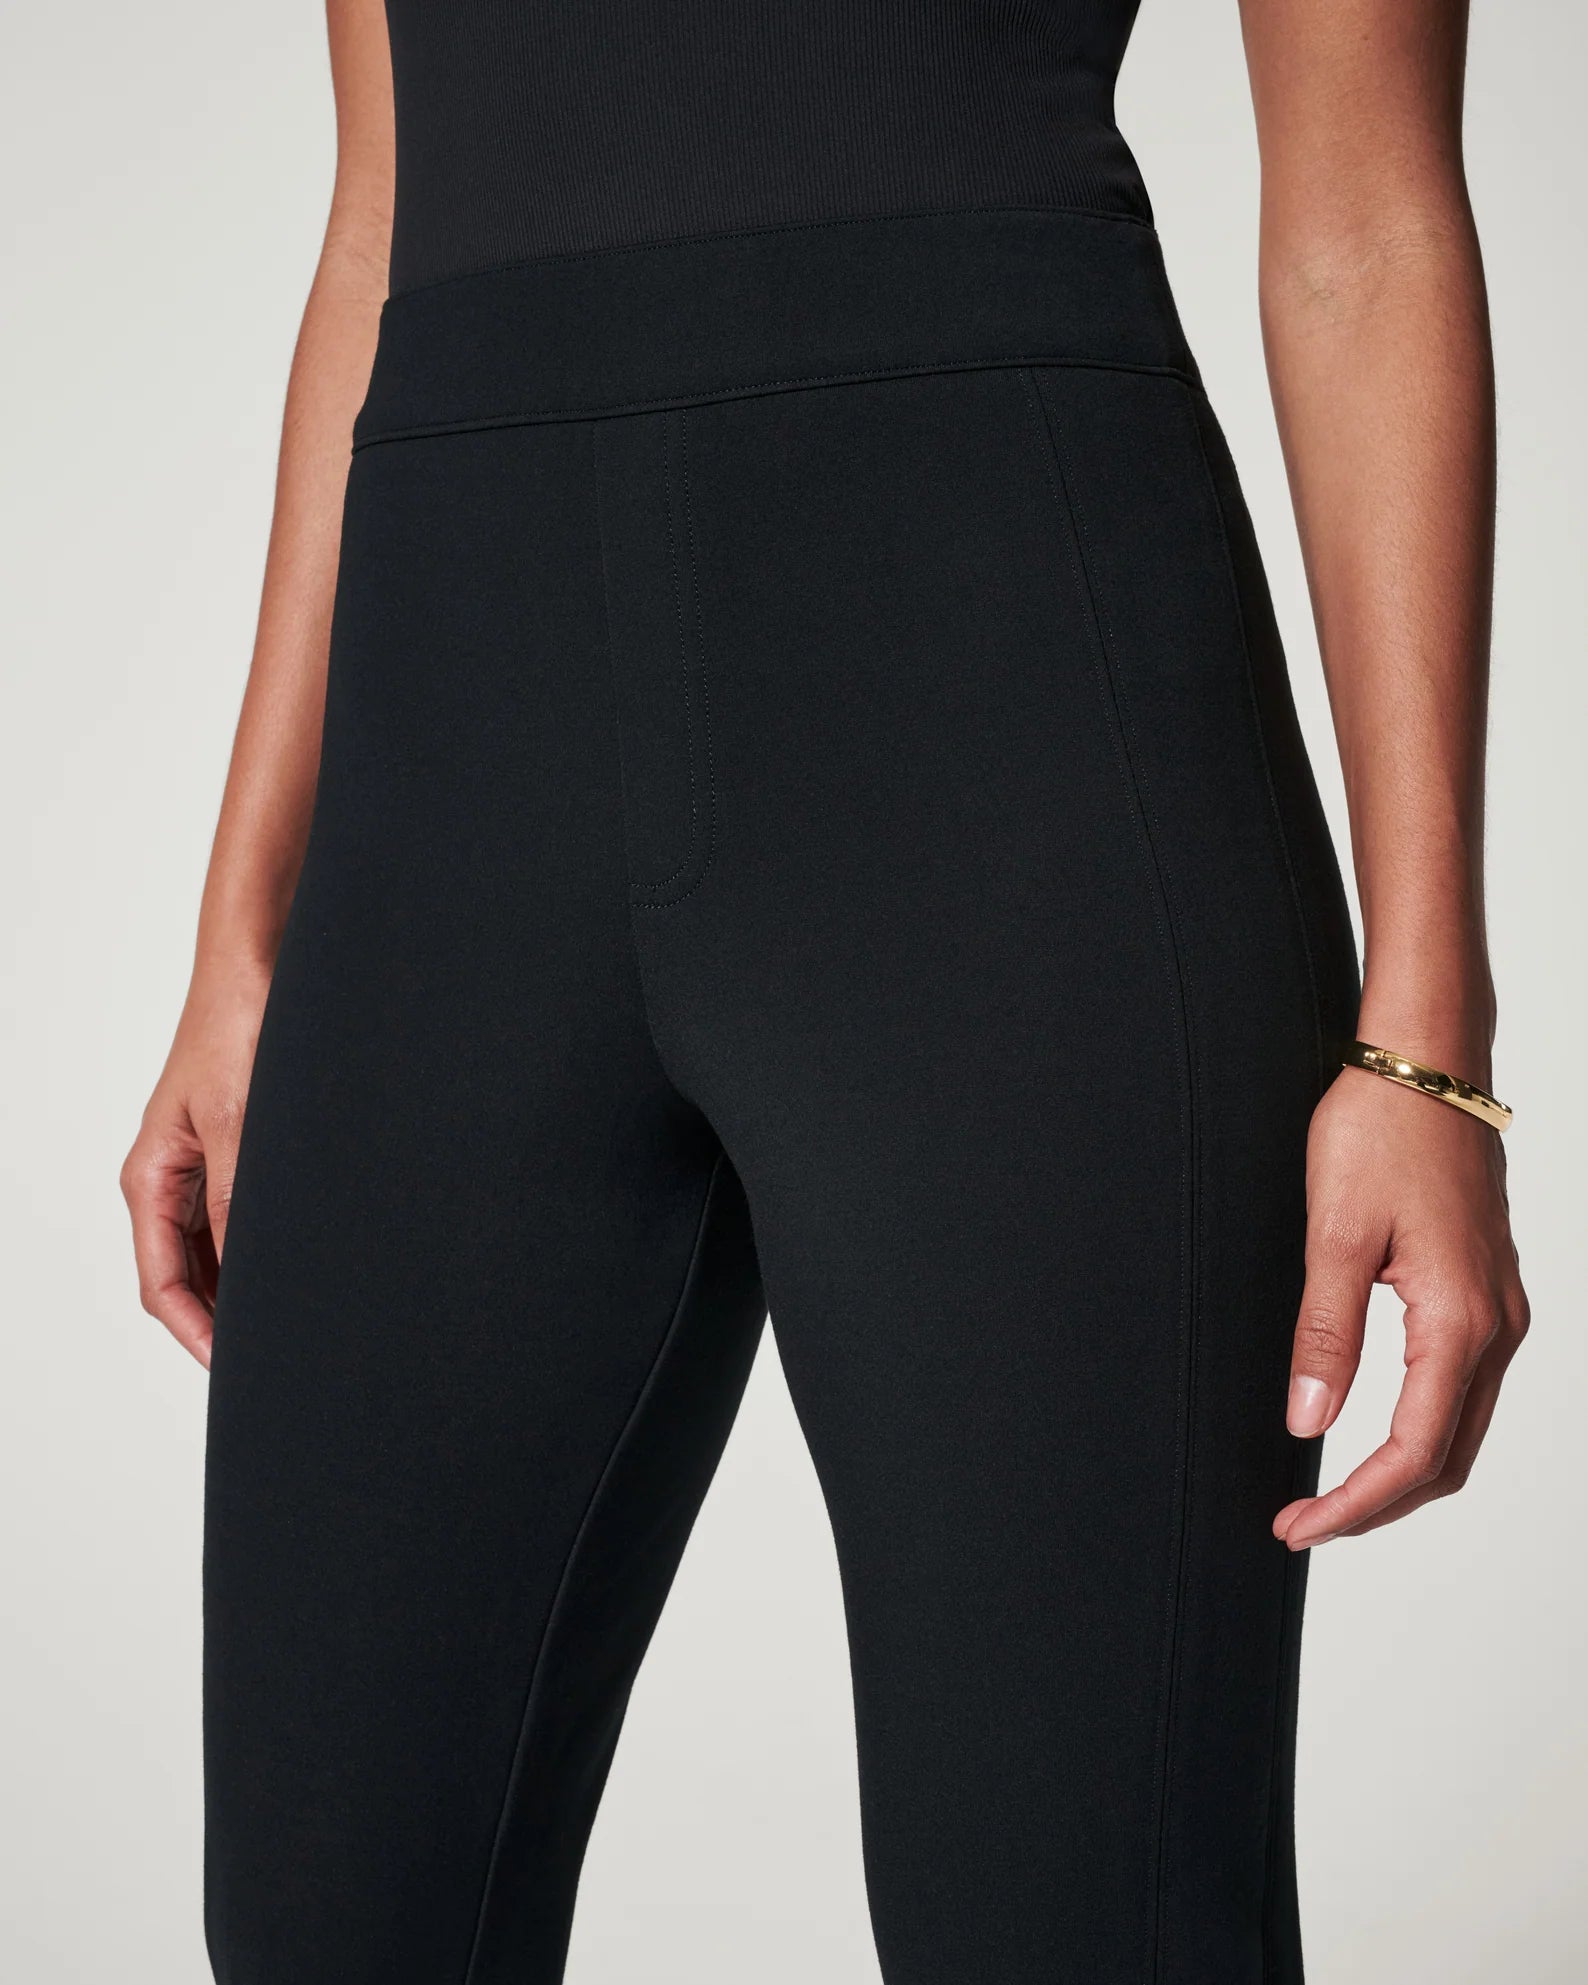 The Perfect Pant - Slim Straight